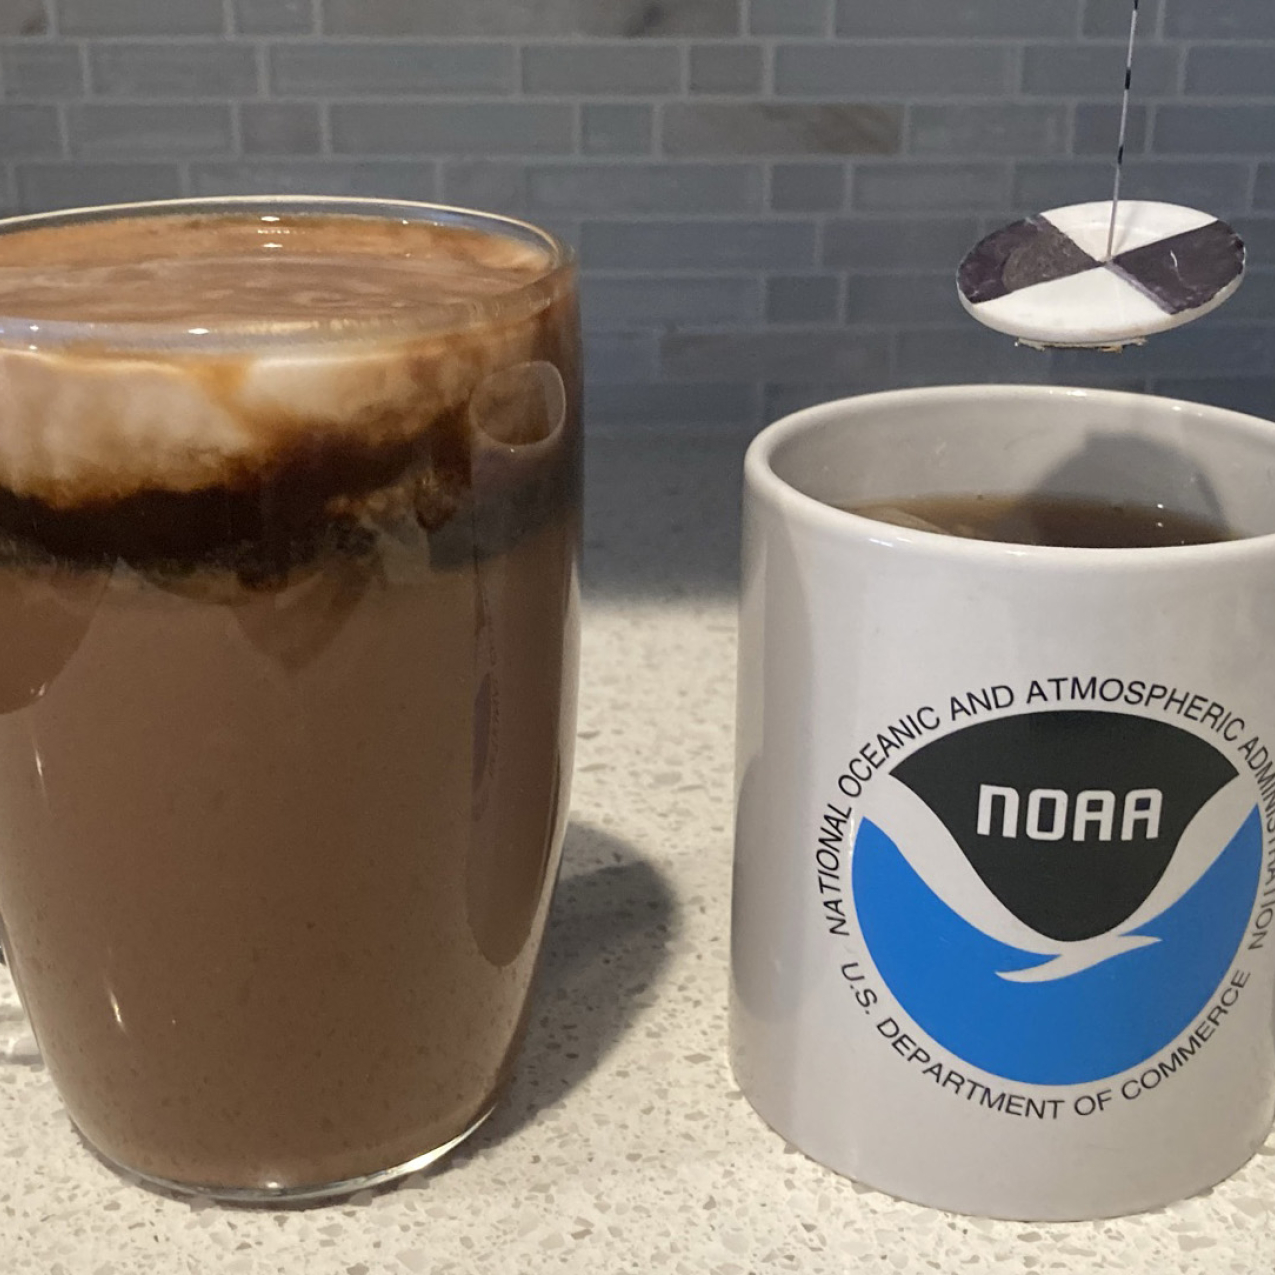 Learn about density by making a fancy layered hot cocoa or find out the "secc-tea" depth of your perfect up of tea with our oceanography in a mug activities. 
Two mugs are placed on a kitchen counter. One mug has the NOAA logo on it and a miniature secchi disk is suspended above it. (The secchi disk is made of a white disk with black on opposite quarters. It is hanging from a string that has markings every centimeter.) The other mug is made of clear glass, and it contains hot cocoa topped with a layer of